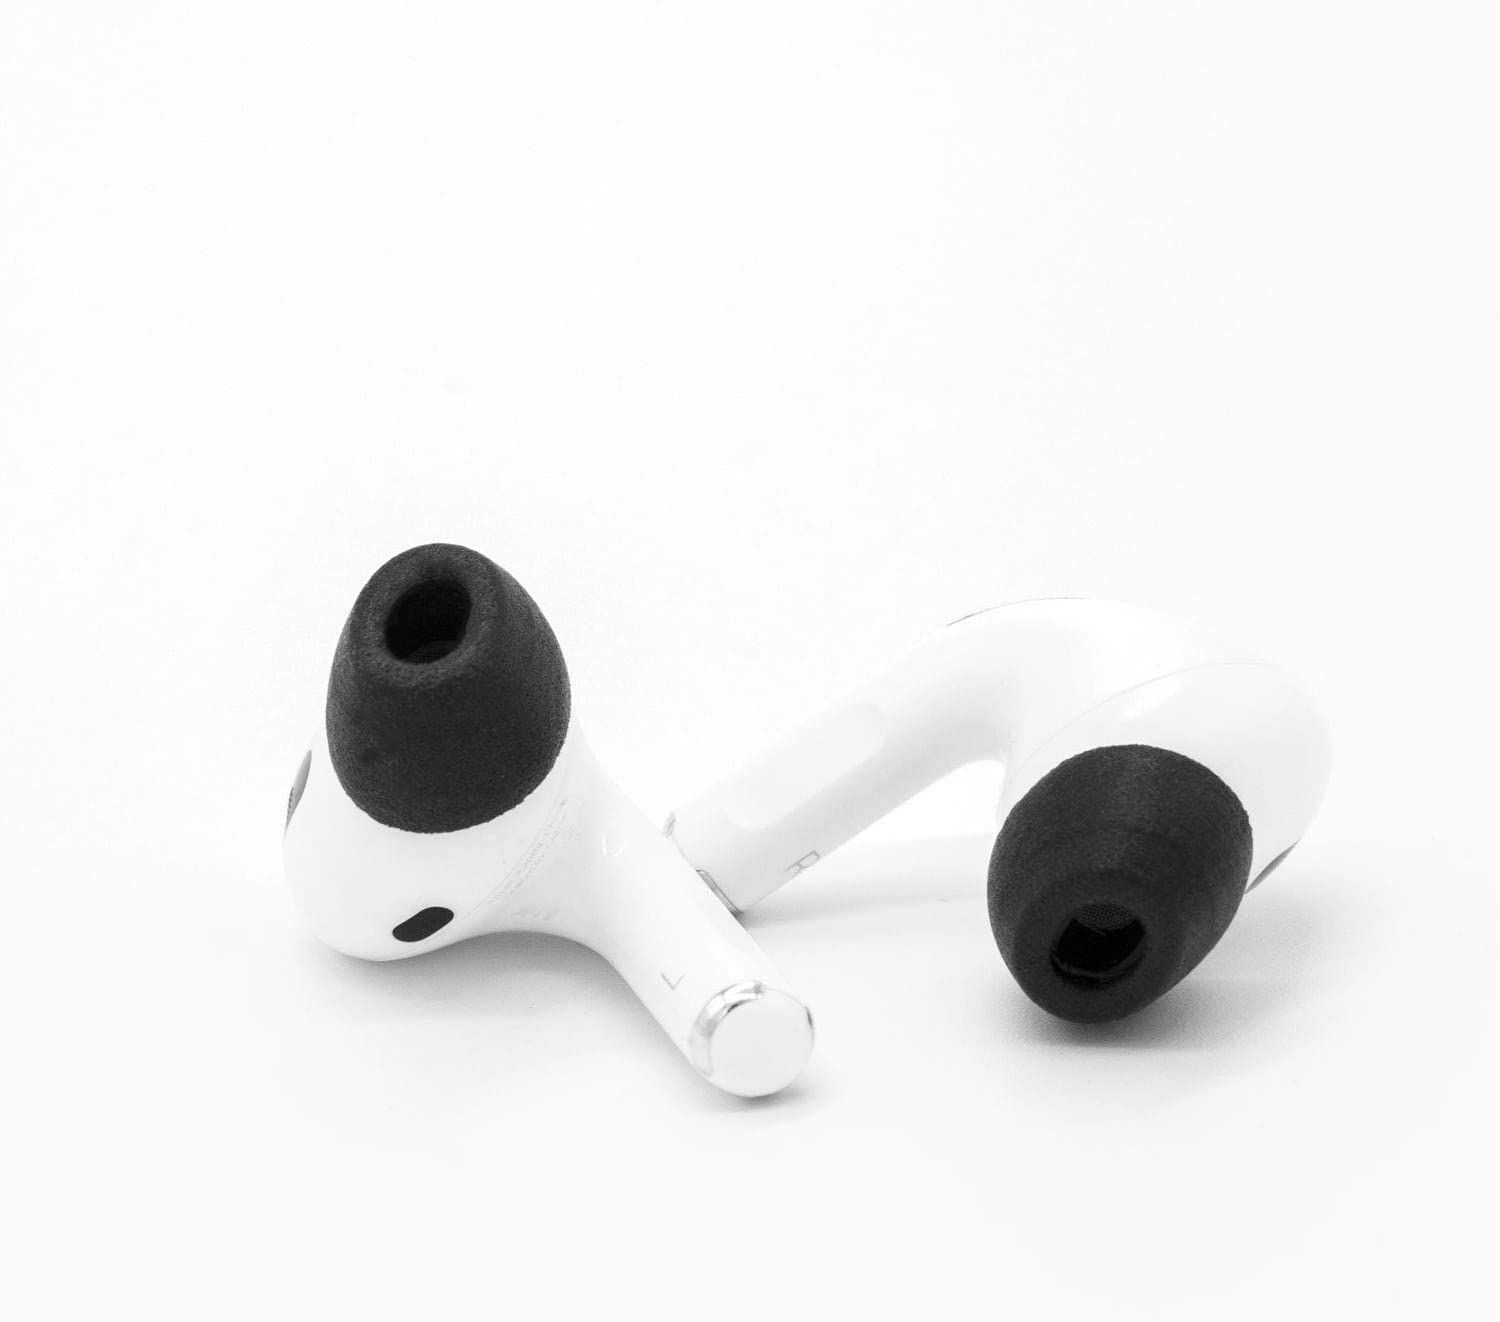 Comply AirPods Pro Foam Ear Tips